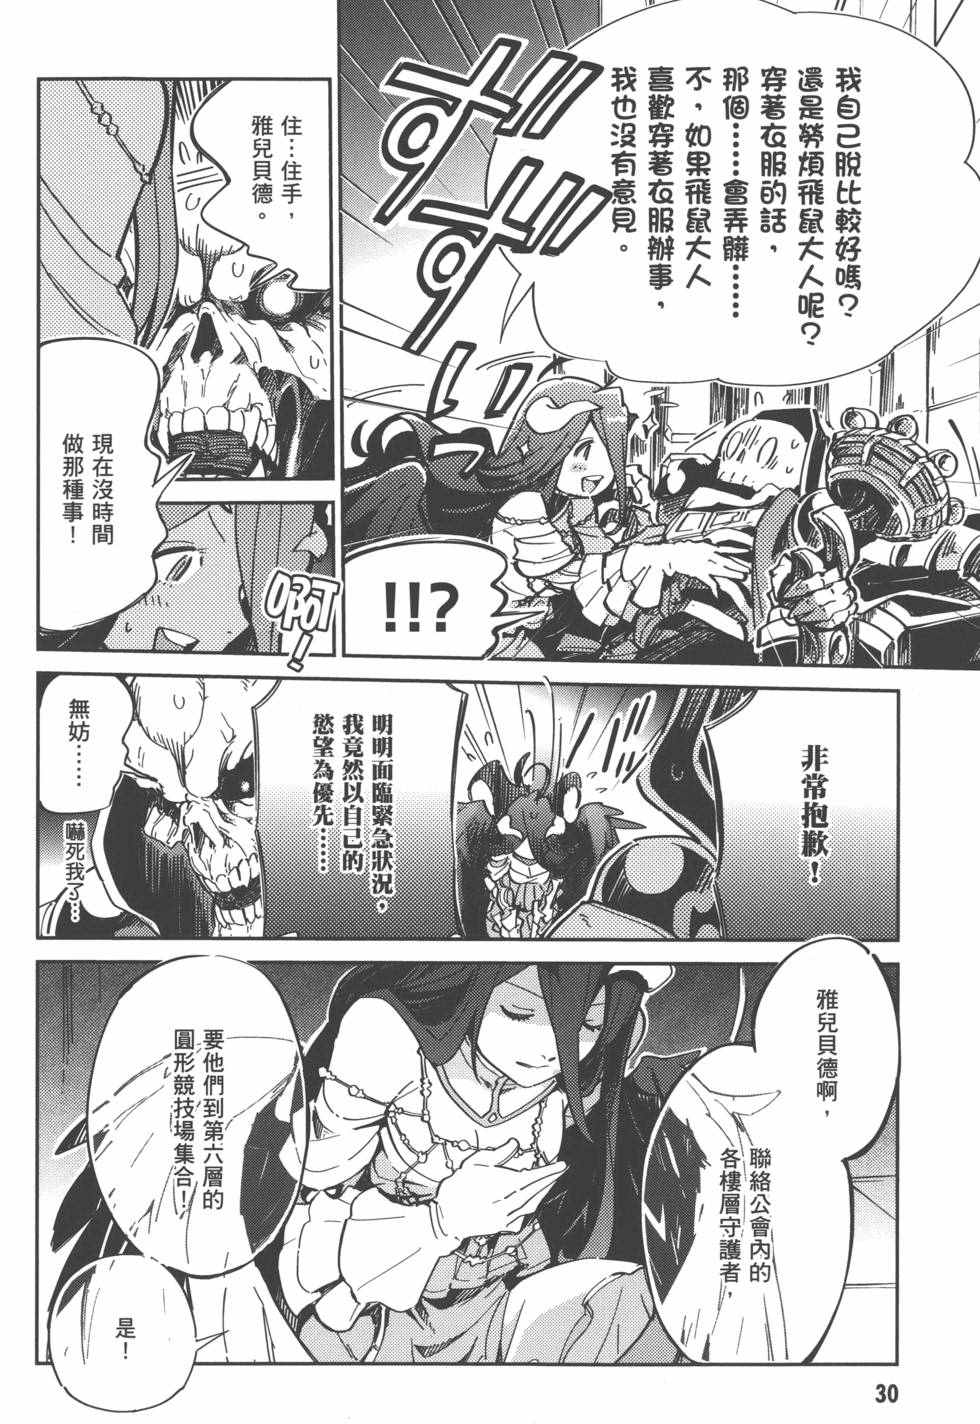 OVERLORD - 第1卷(1/4) - 8